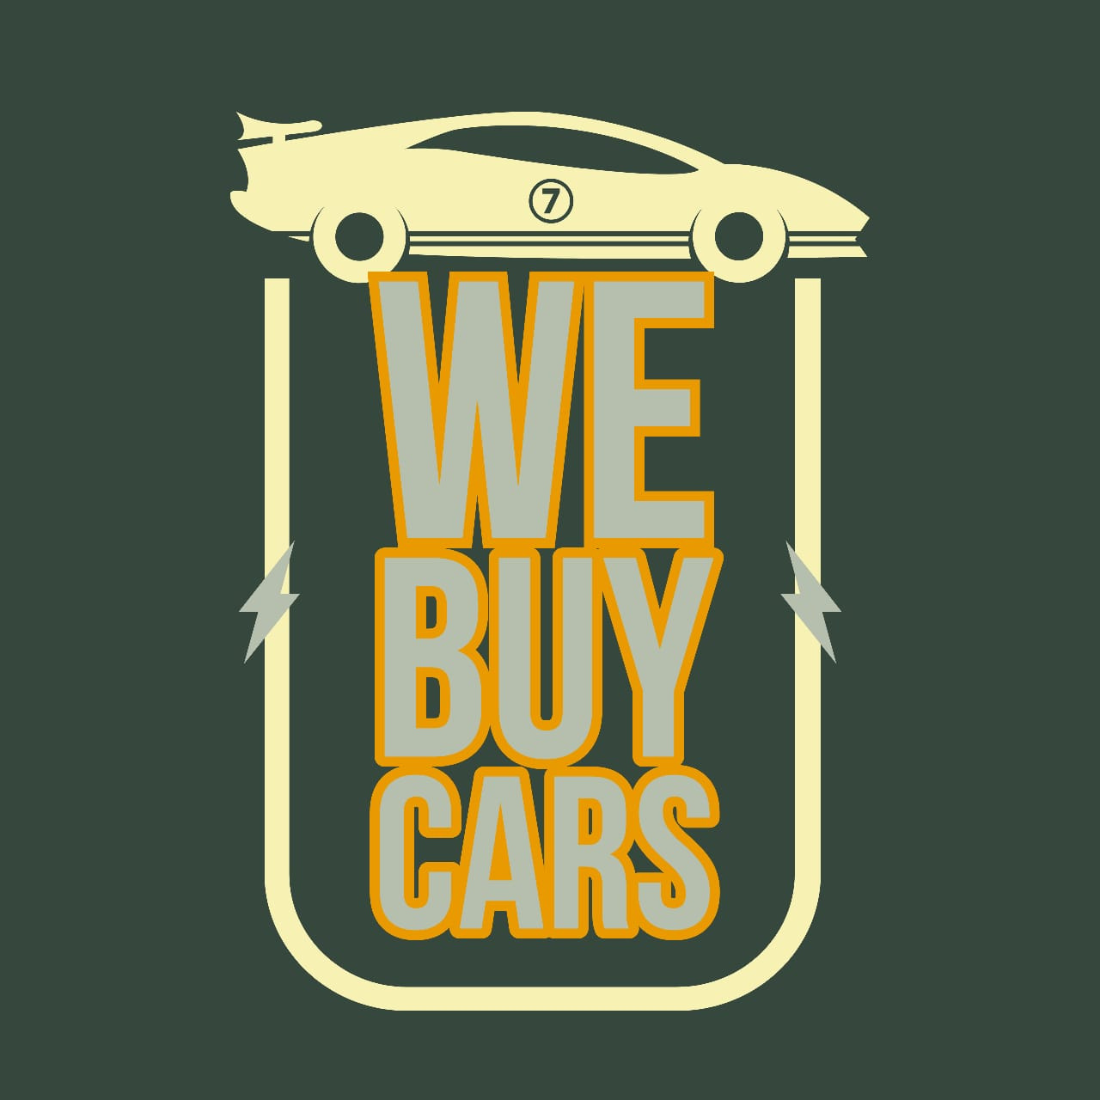 We Buy Cars Business Logos in grey color.